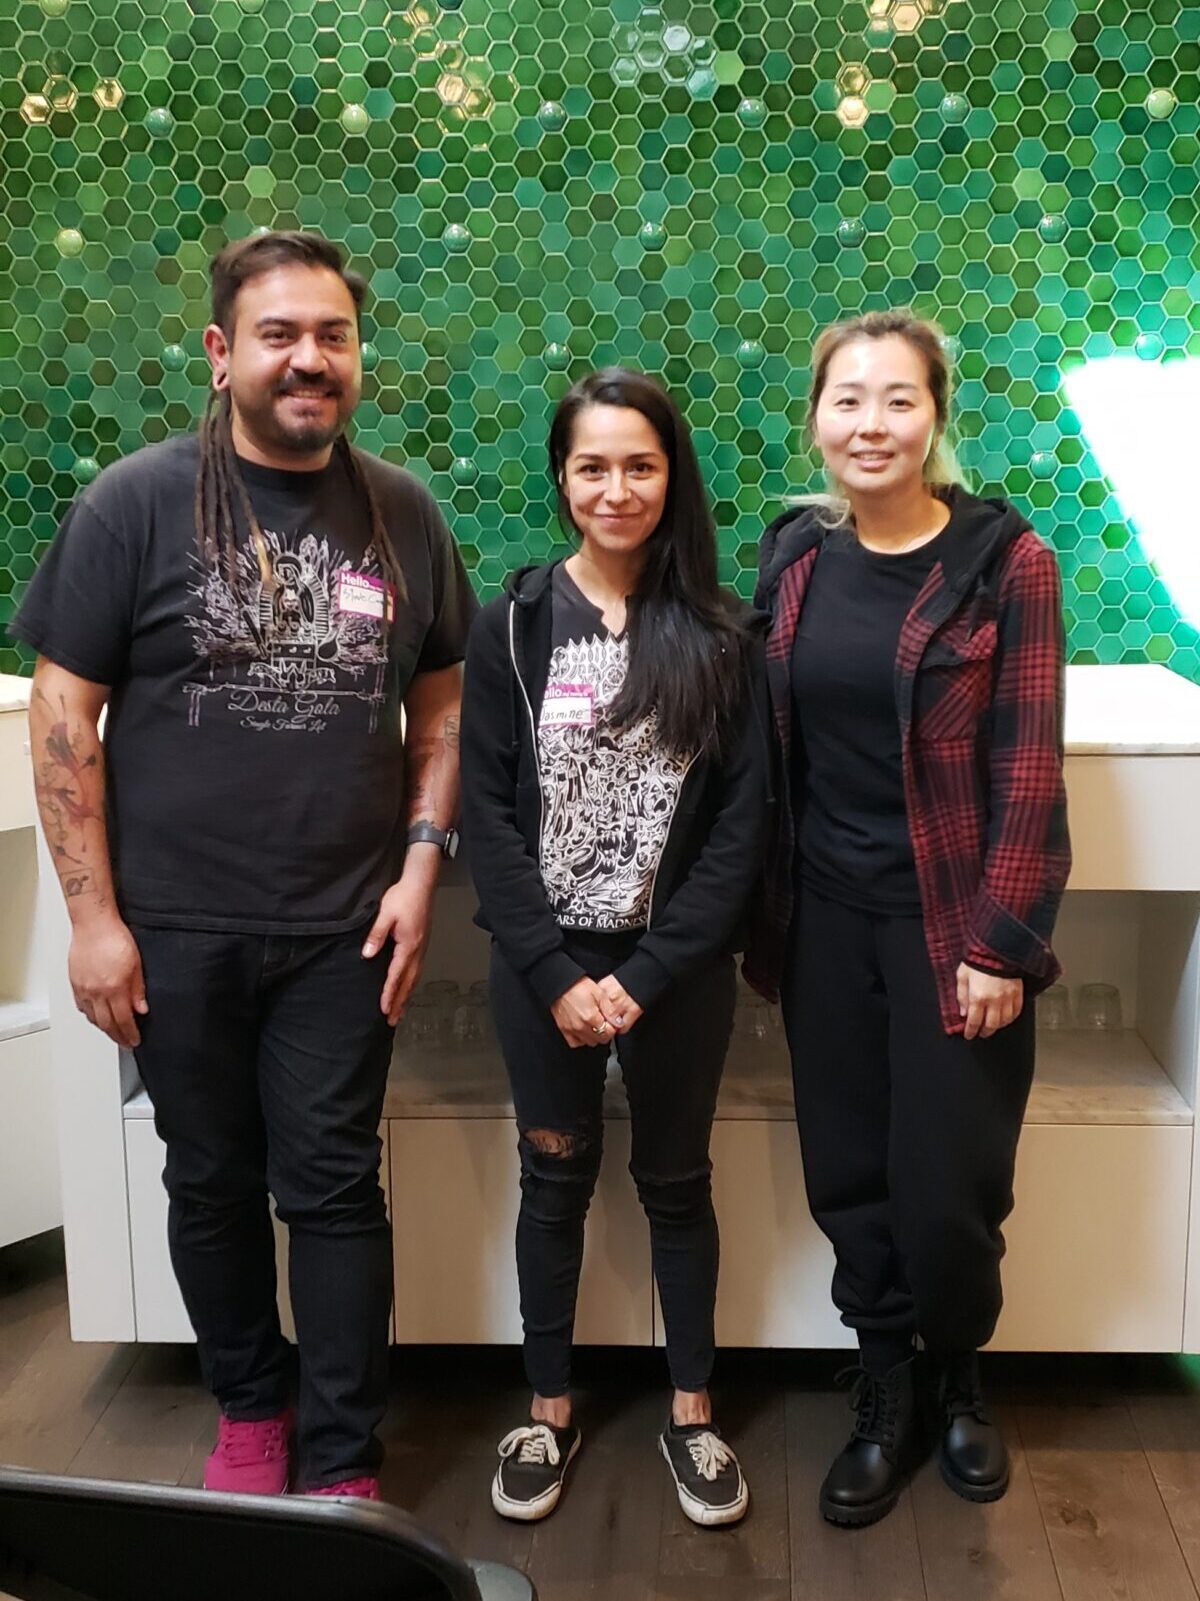 Three people, all with long hair and wearing black, stand together for a photo in front of the green tiled wall at The Crown. They are the Oakland prelims champs.